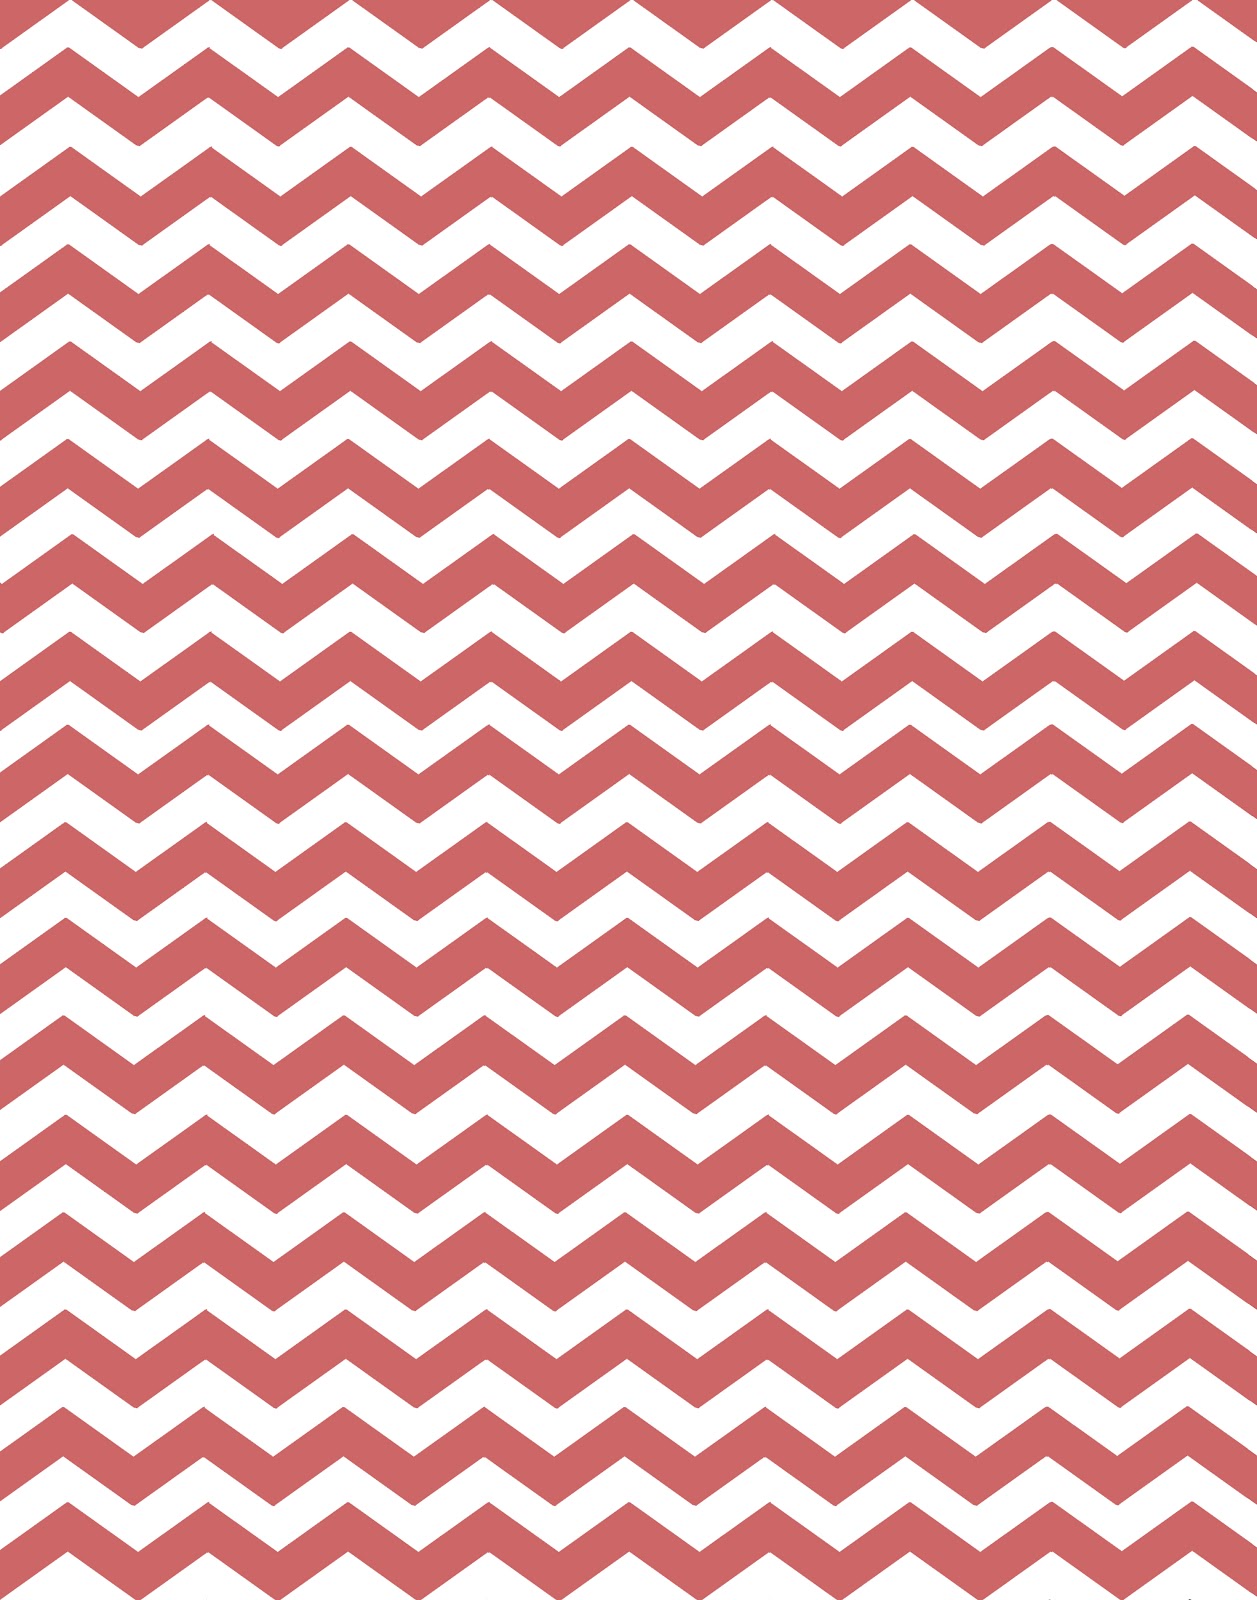 Coral and Turquoise Chevron Wallpaper